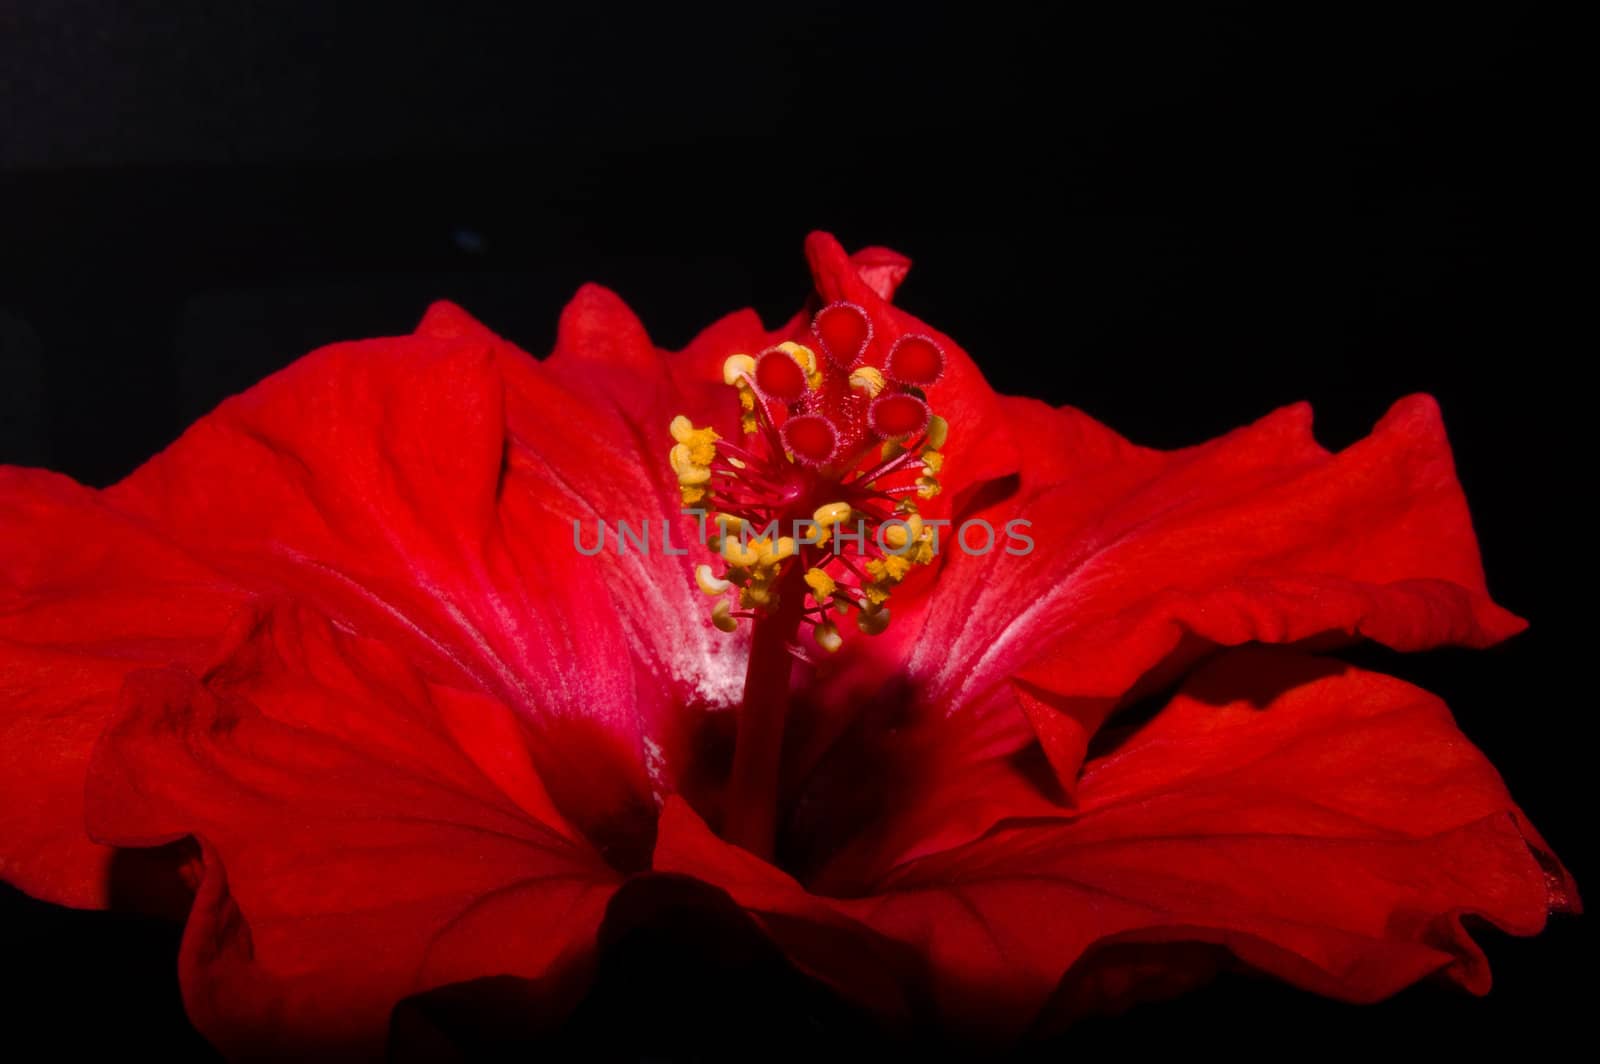 red hibiscus by karinclaus